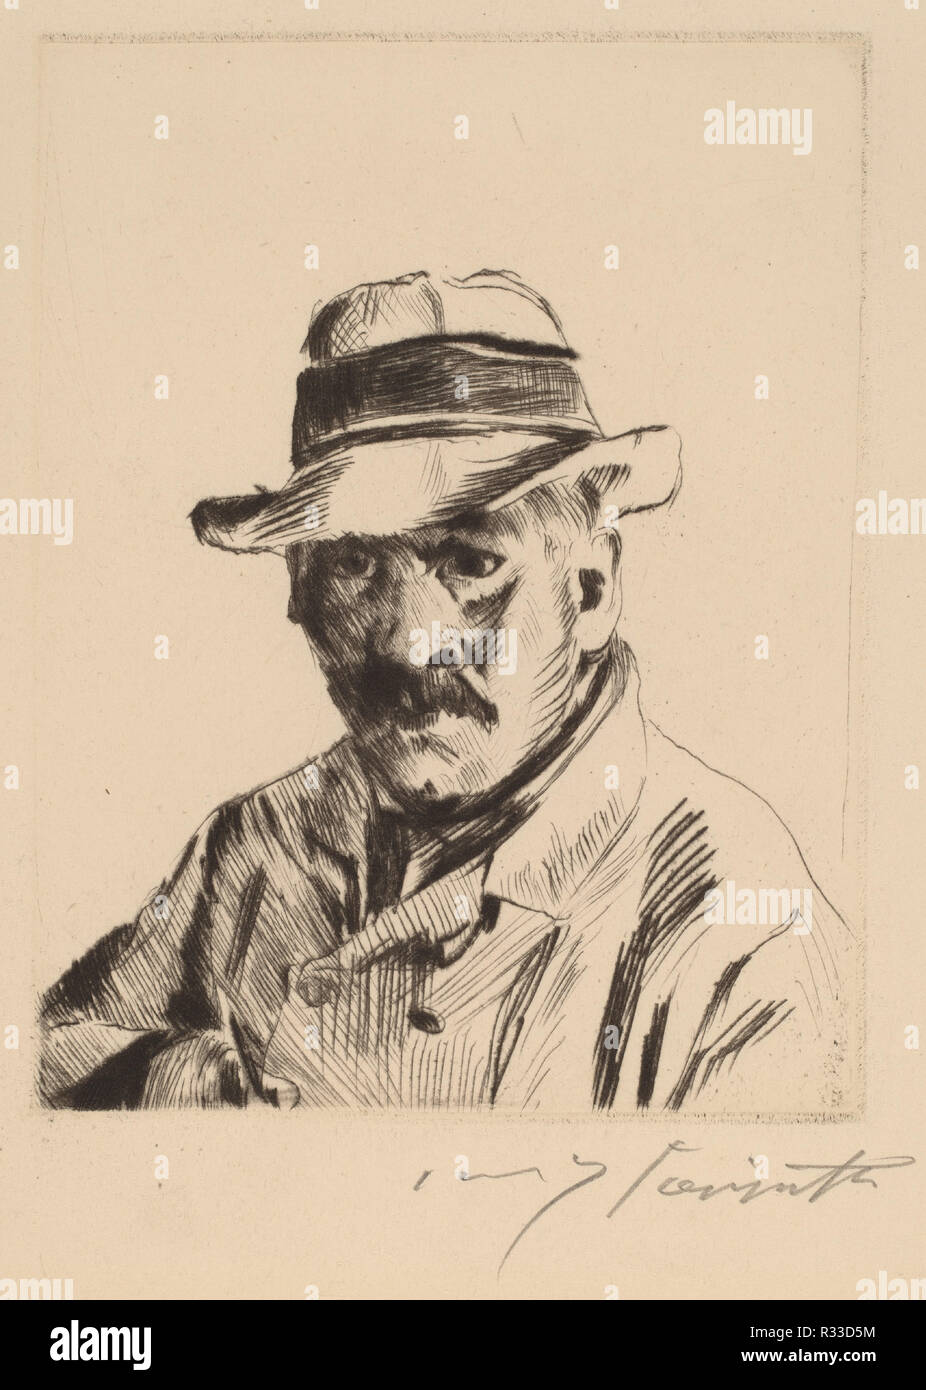 Self-Portrait in a Straw Hat, Bust Length. Dated: 1913. Dimensions: sheet: 42.5 x 34 cm (16 3/4 x 13 3/8 in.)  plate: 15 x 11.5 cm (5 7/8 x 4 1/2 in.). Medium: drypoint. Museum: National Gallery of Art, Washington DC. Author: Lovis Corinth. Stock Photo